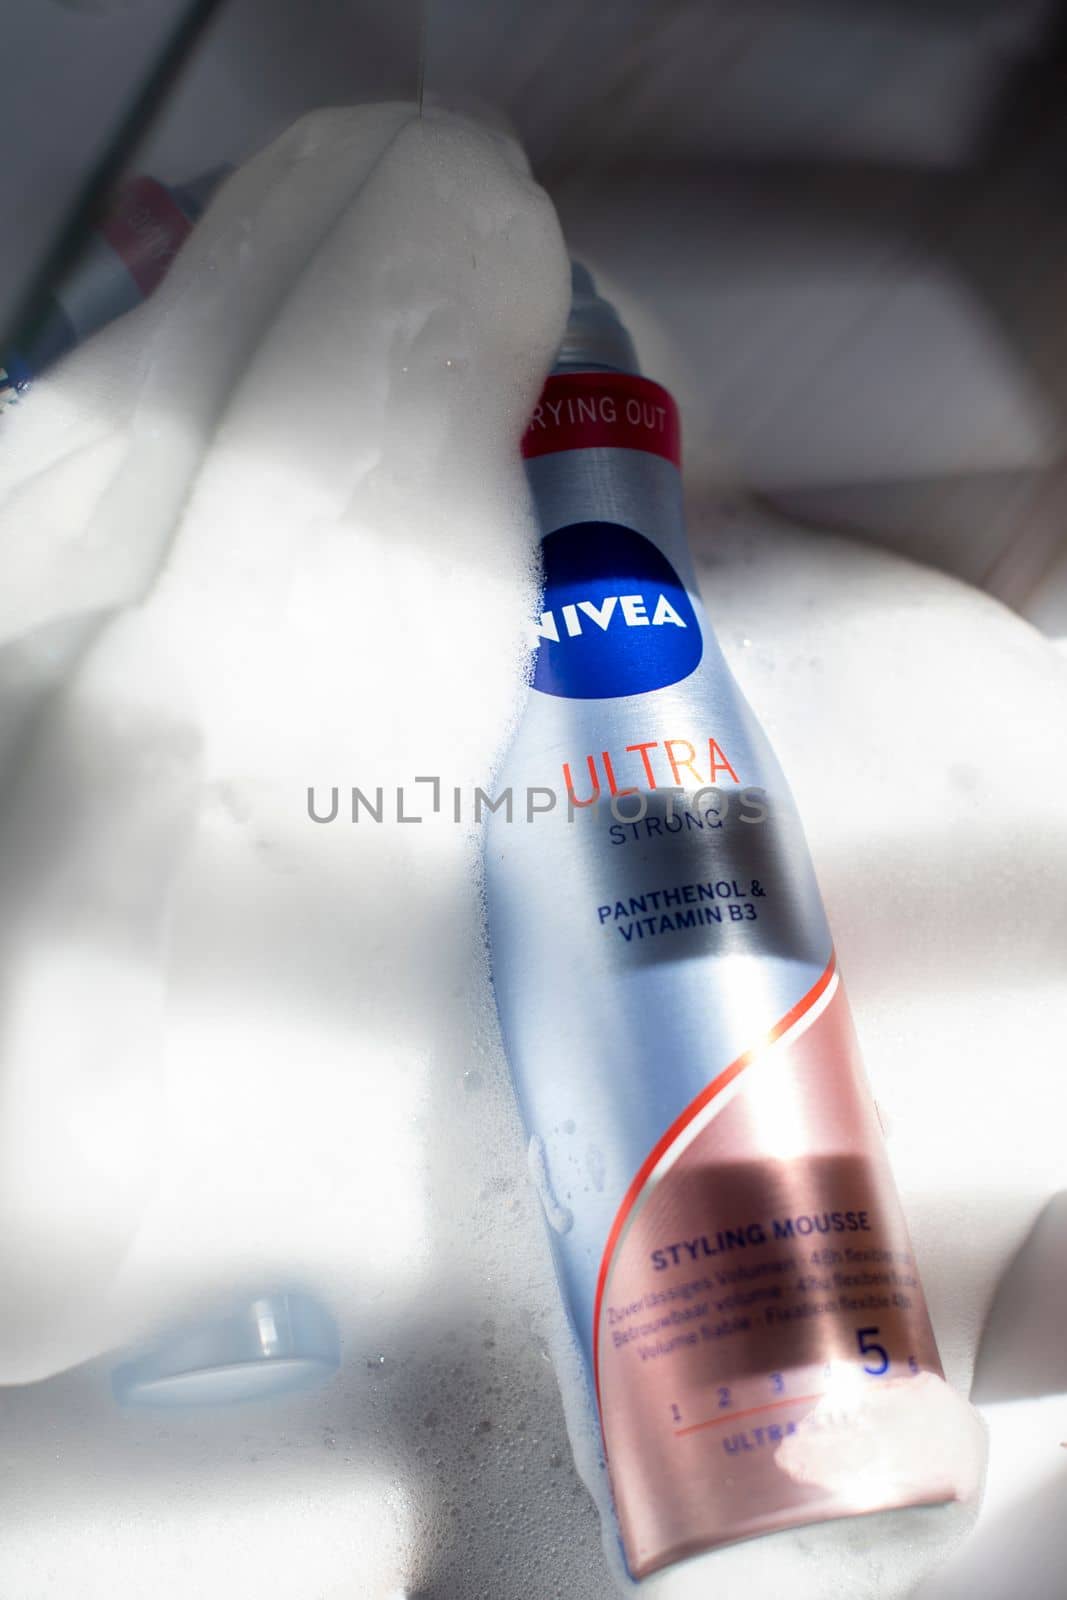 Nivea hair fixing mousse in foam and sunshine,close-up As,Belgium, Juny 30, 2022 by KaterinaDalemans